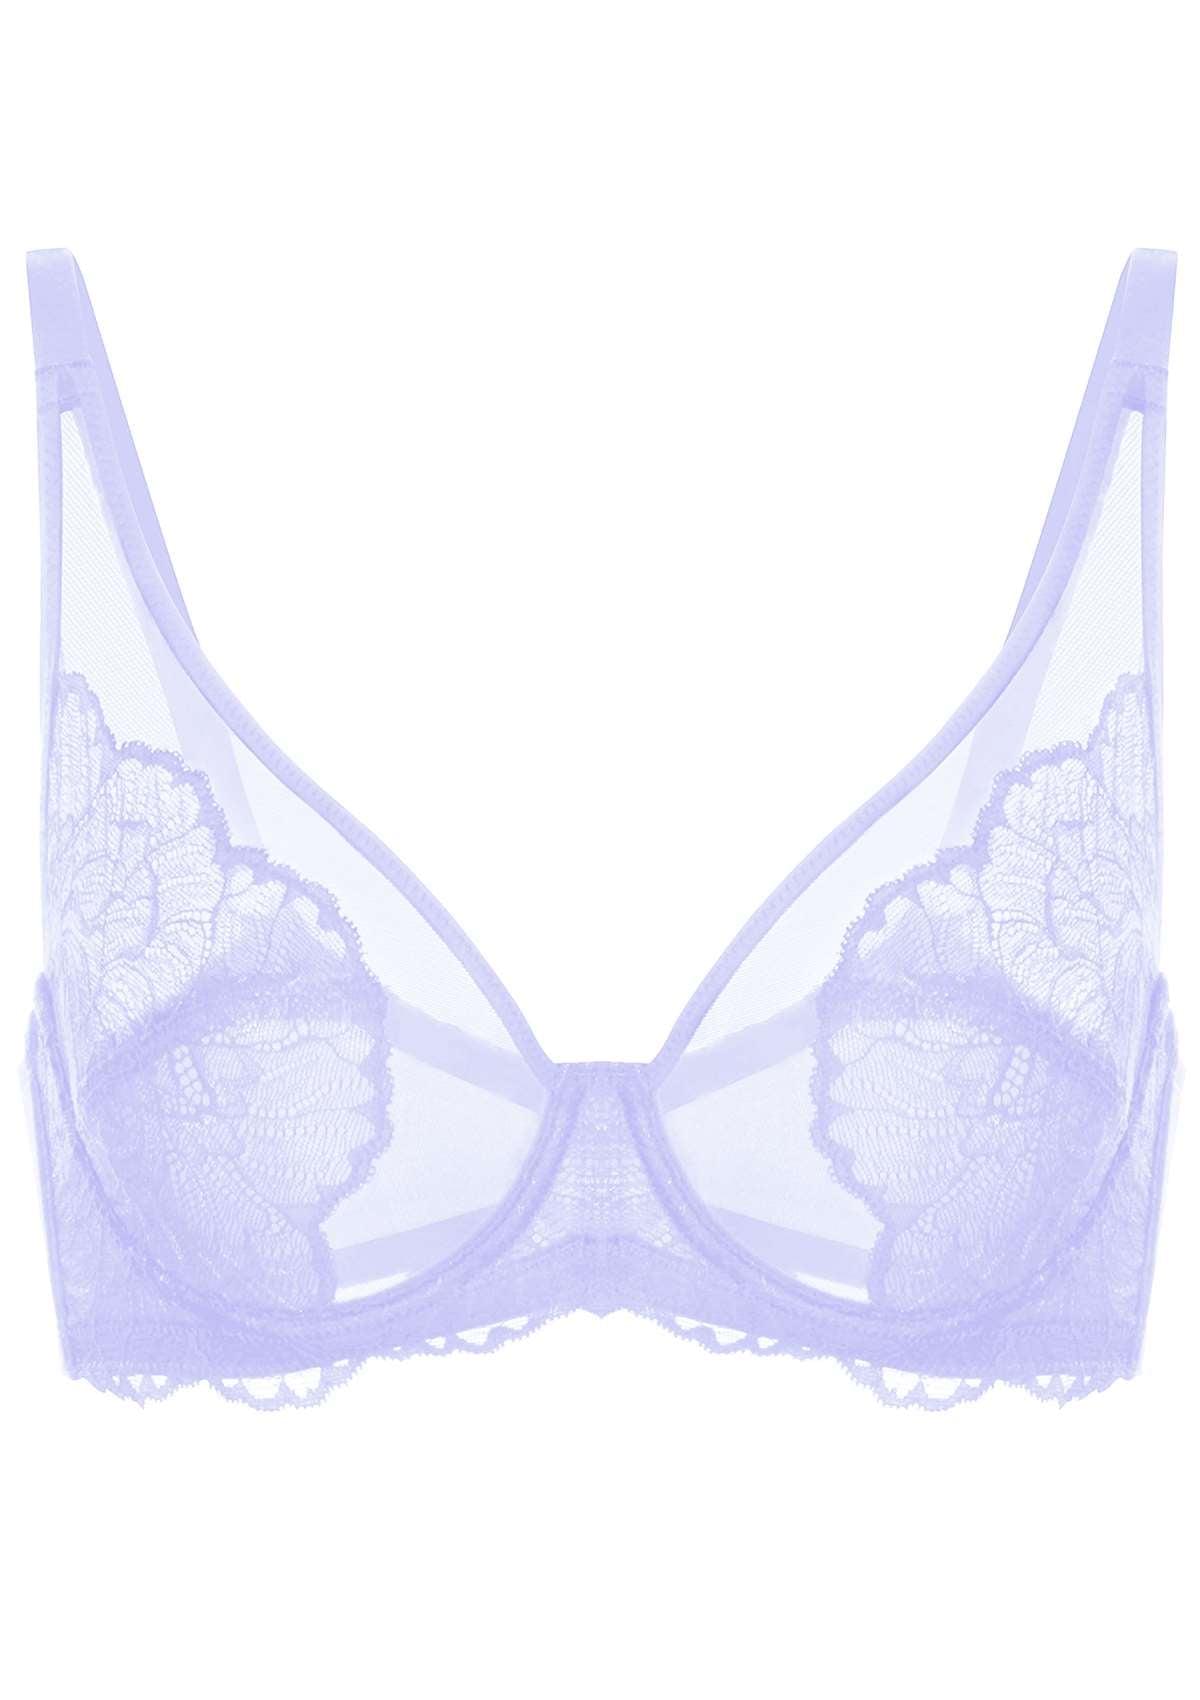 HSIA Blossom Transparent Lace Bra: Plus Size Wired Back Smoothing Bra - Light Purple / 42 / D